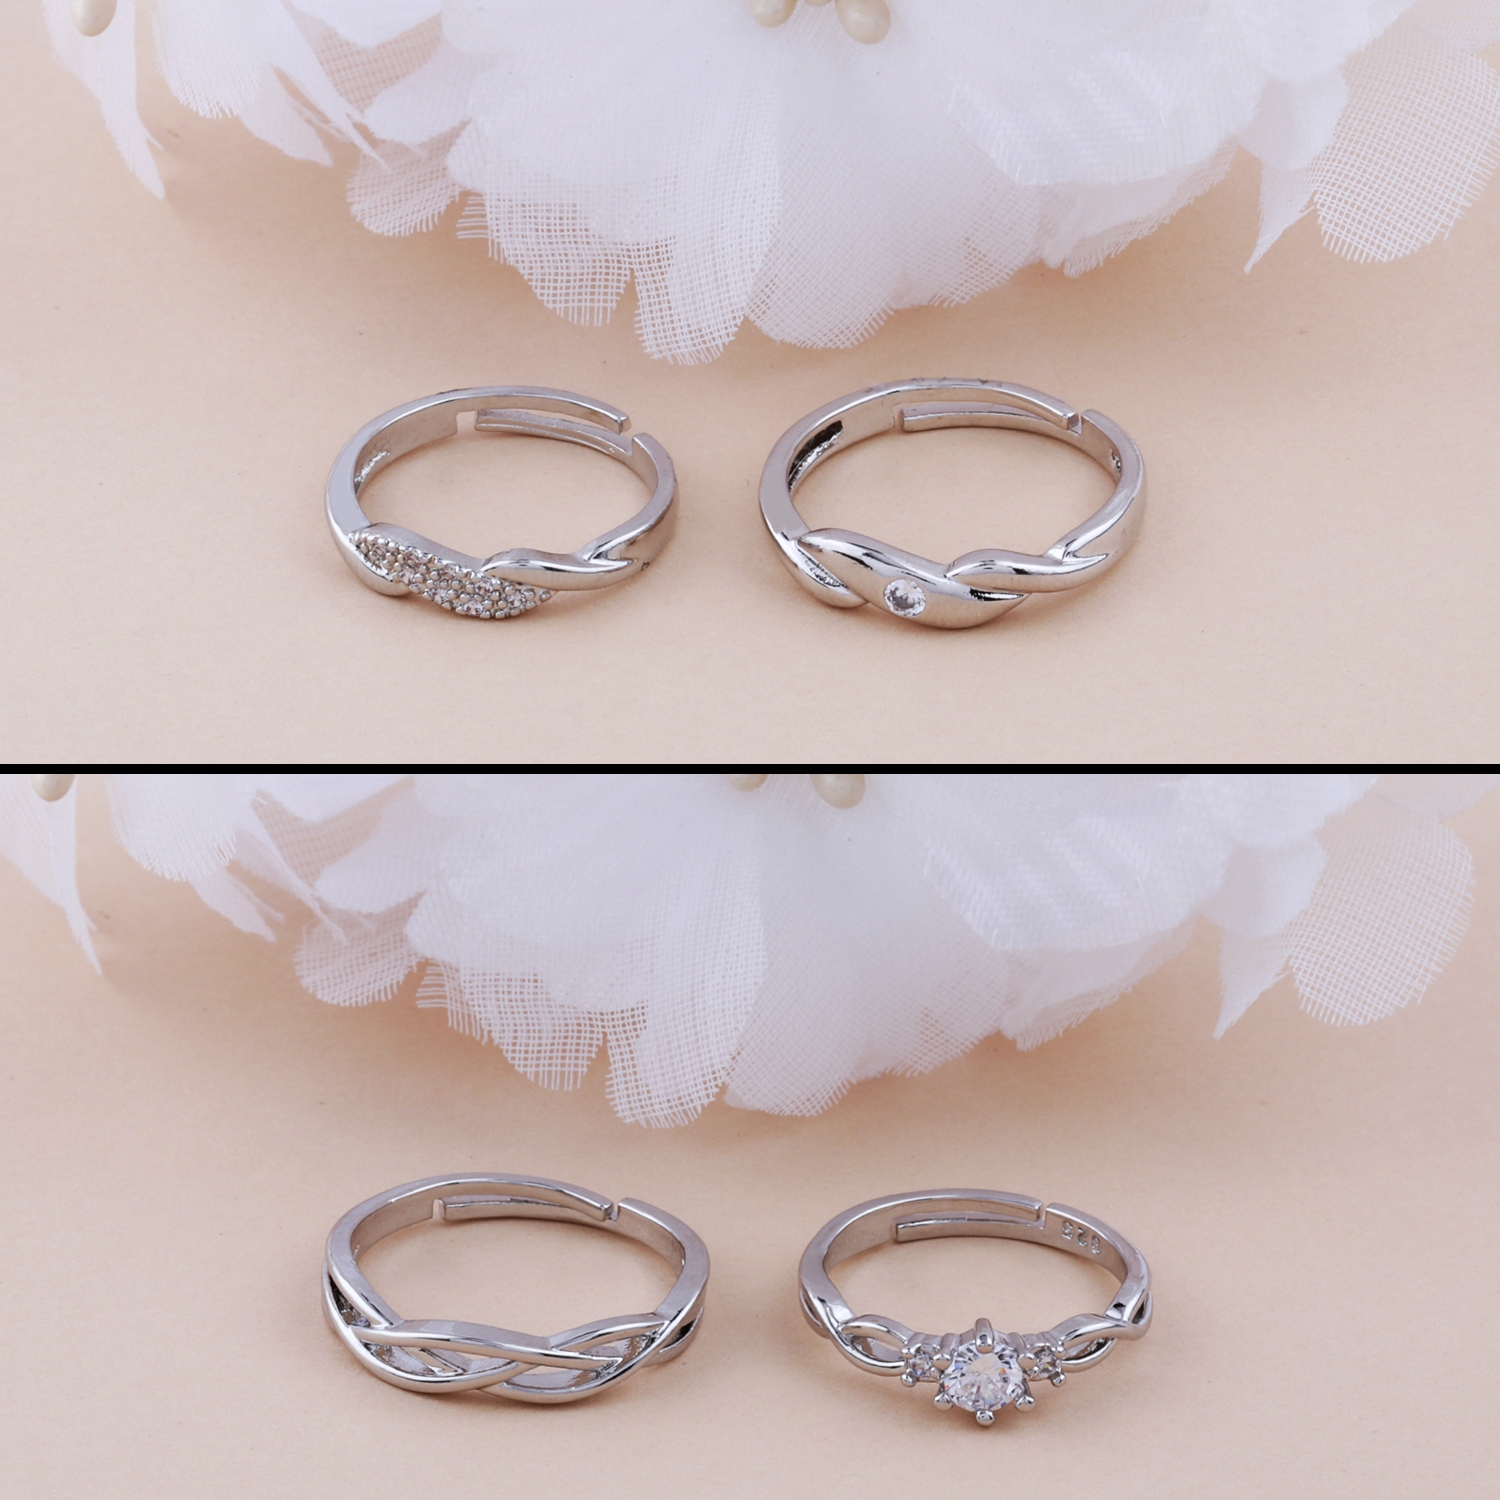 Double Flowers Fresh Adjustable Opening Sterling Silver Ring only $15.99  -ByGoods.com | Silver ring designs, Silver bracelet designs, Silver jewelry  fashion